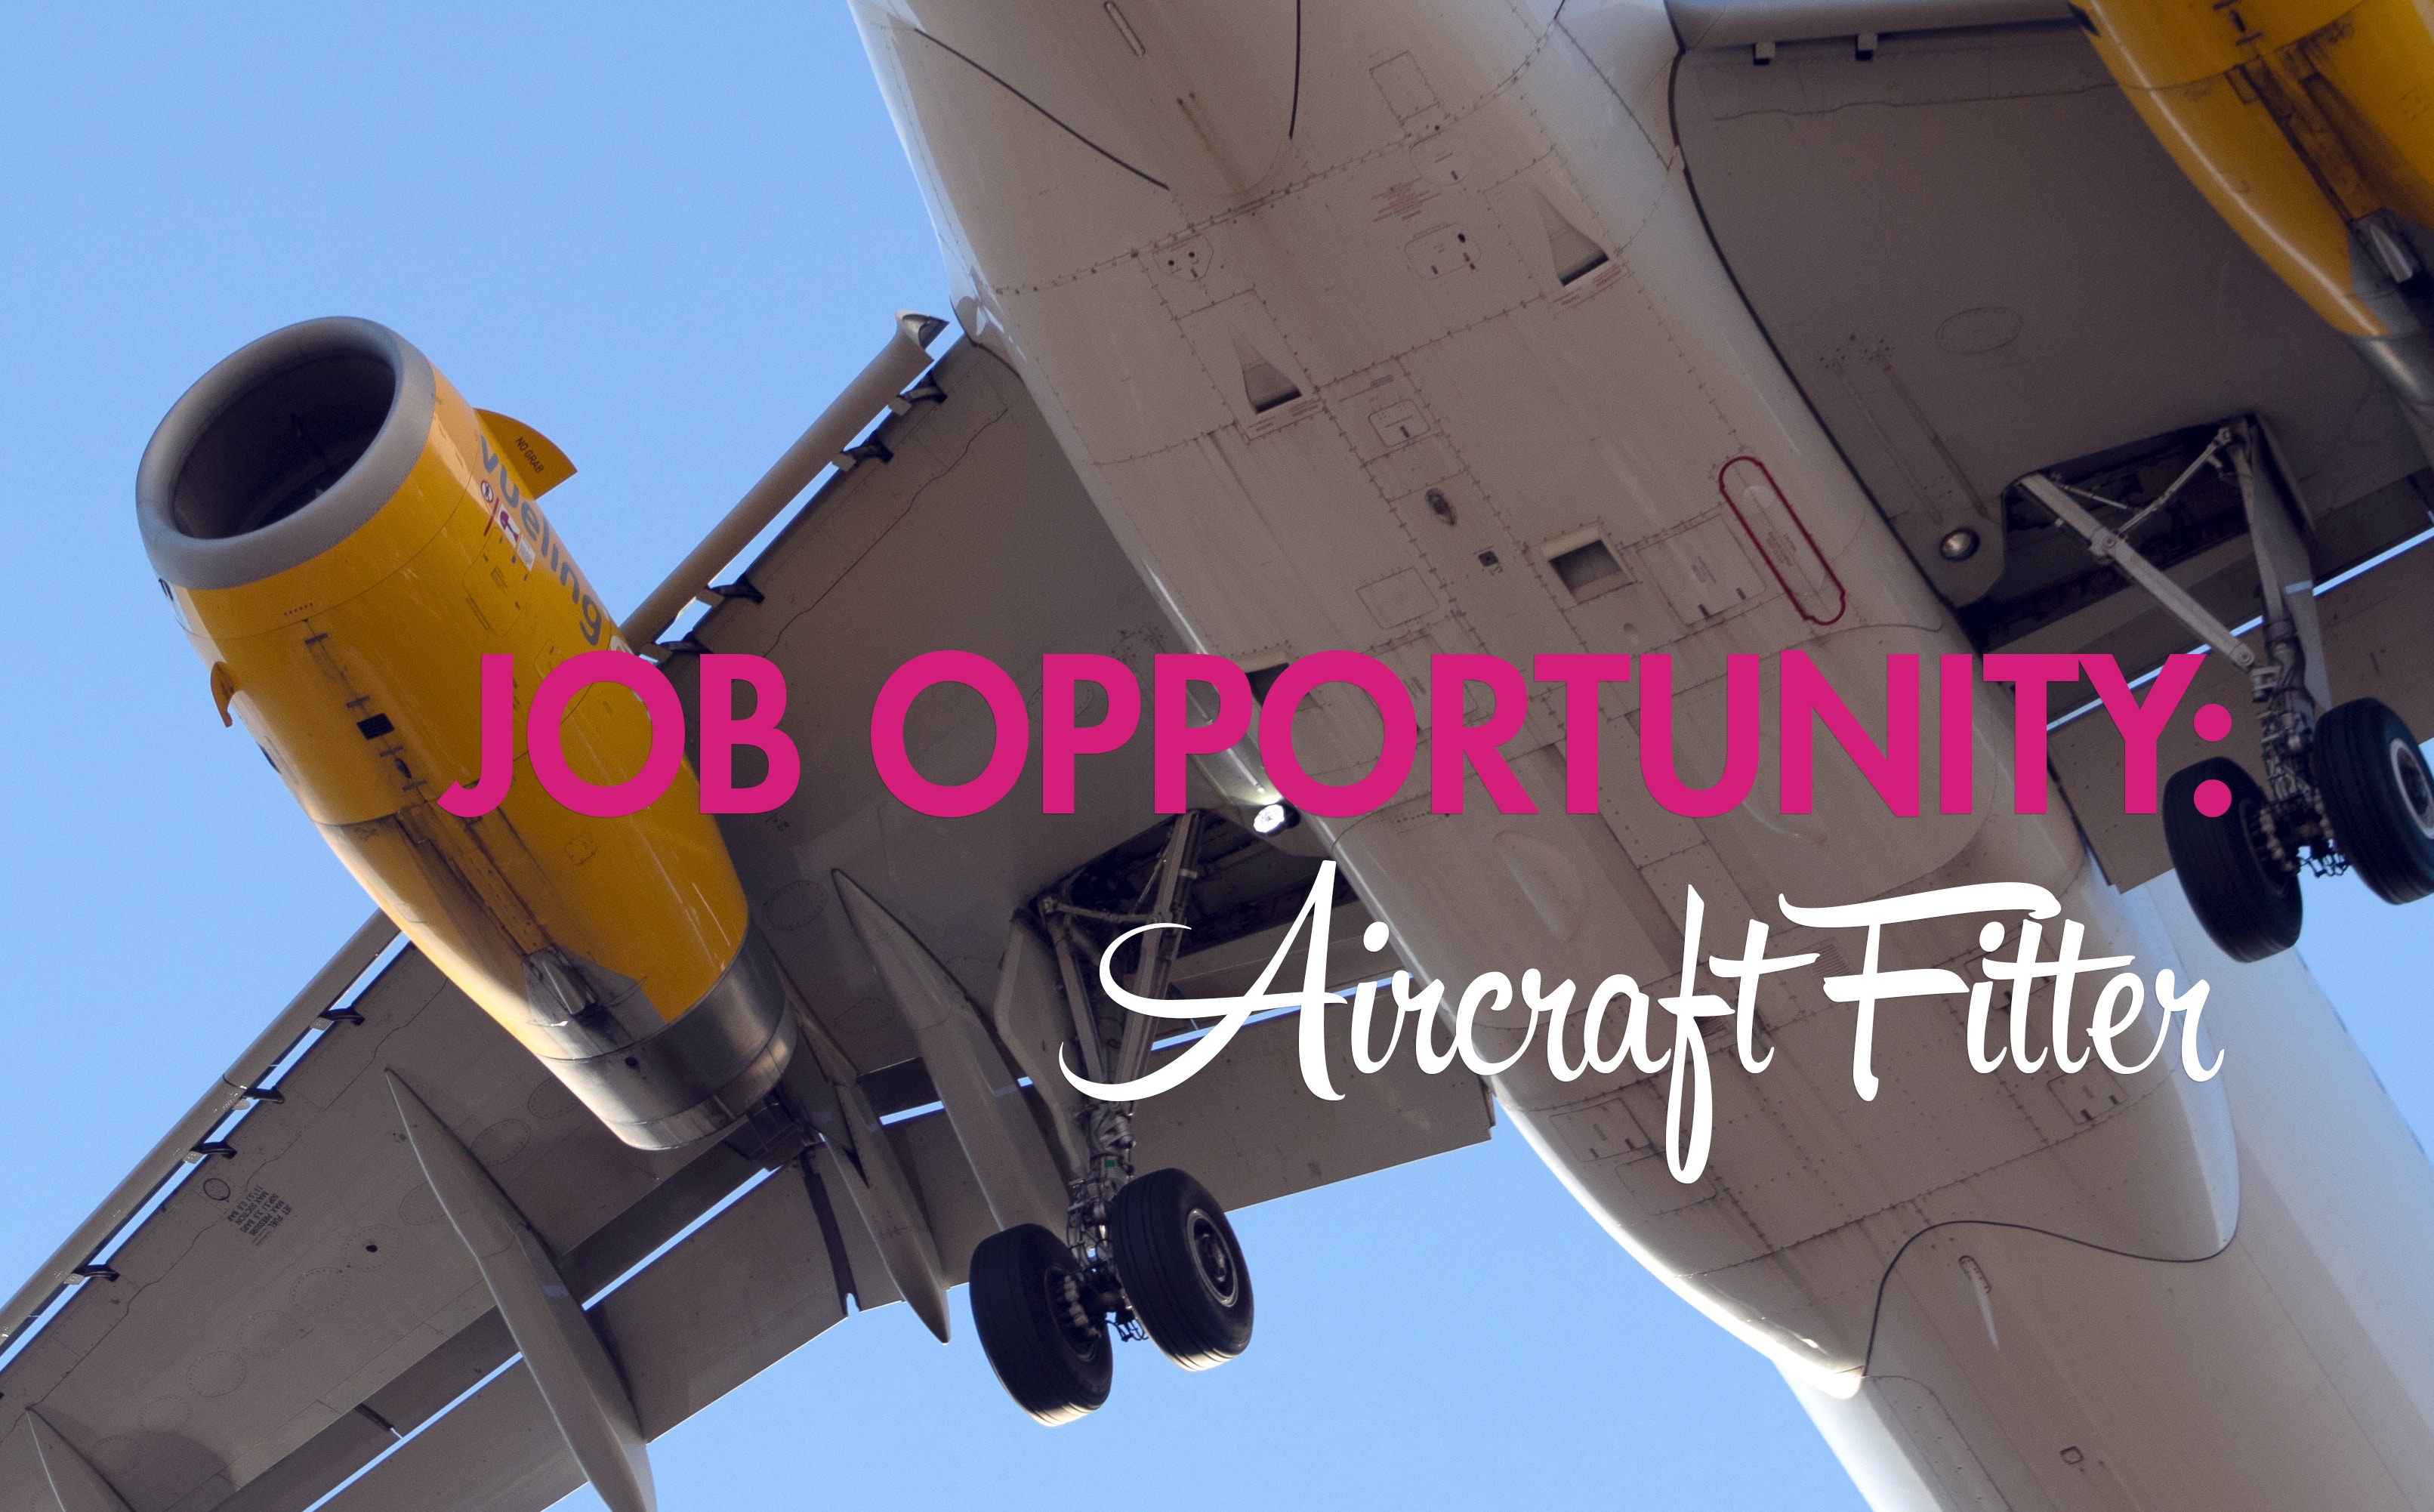 Job opportunity- aircraft fitters